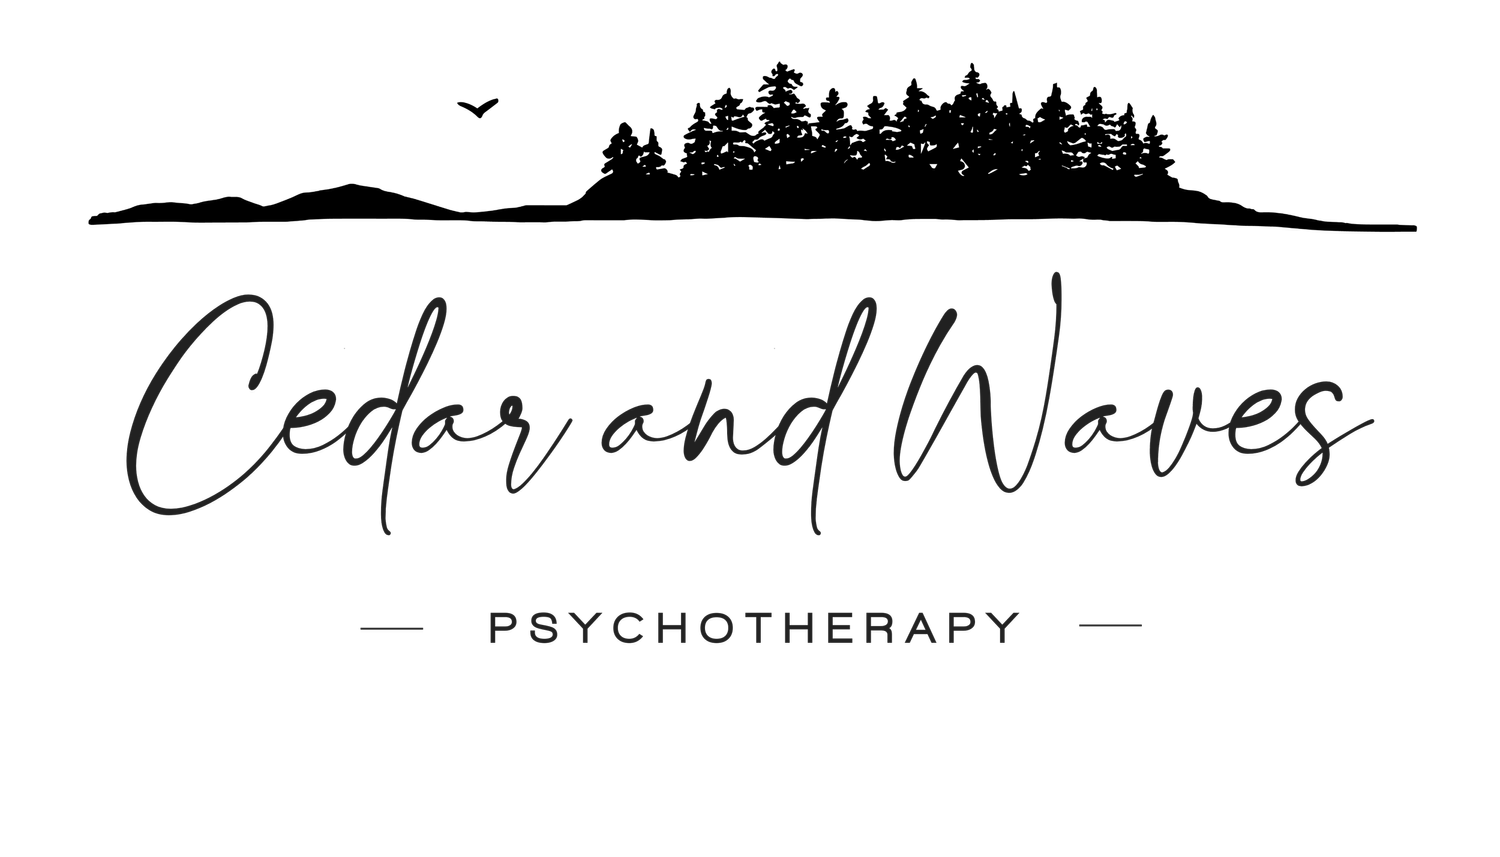 Cedar and Waves Psychotherapy, Art Therapy, and Play Therapy in Collingwood Ontario